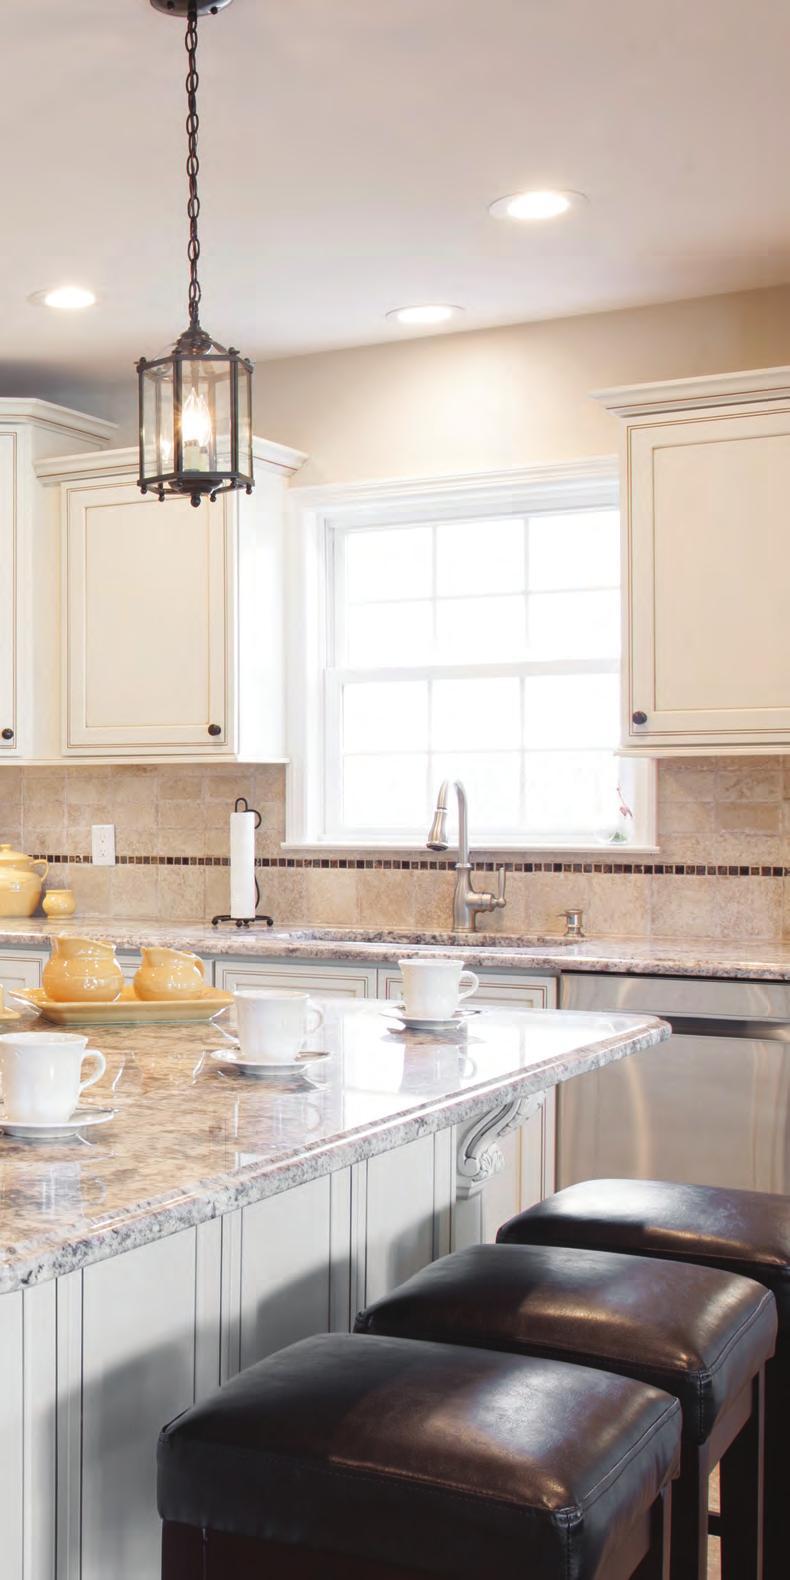 Your kitchen the heart of your home envisioned in new styles.